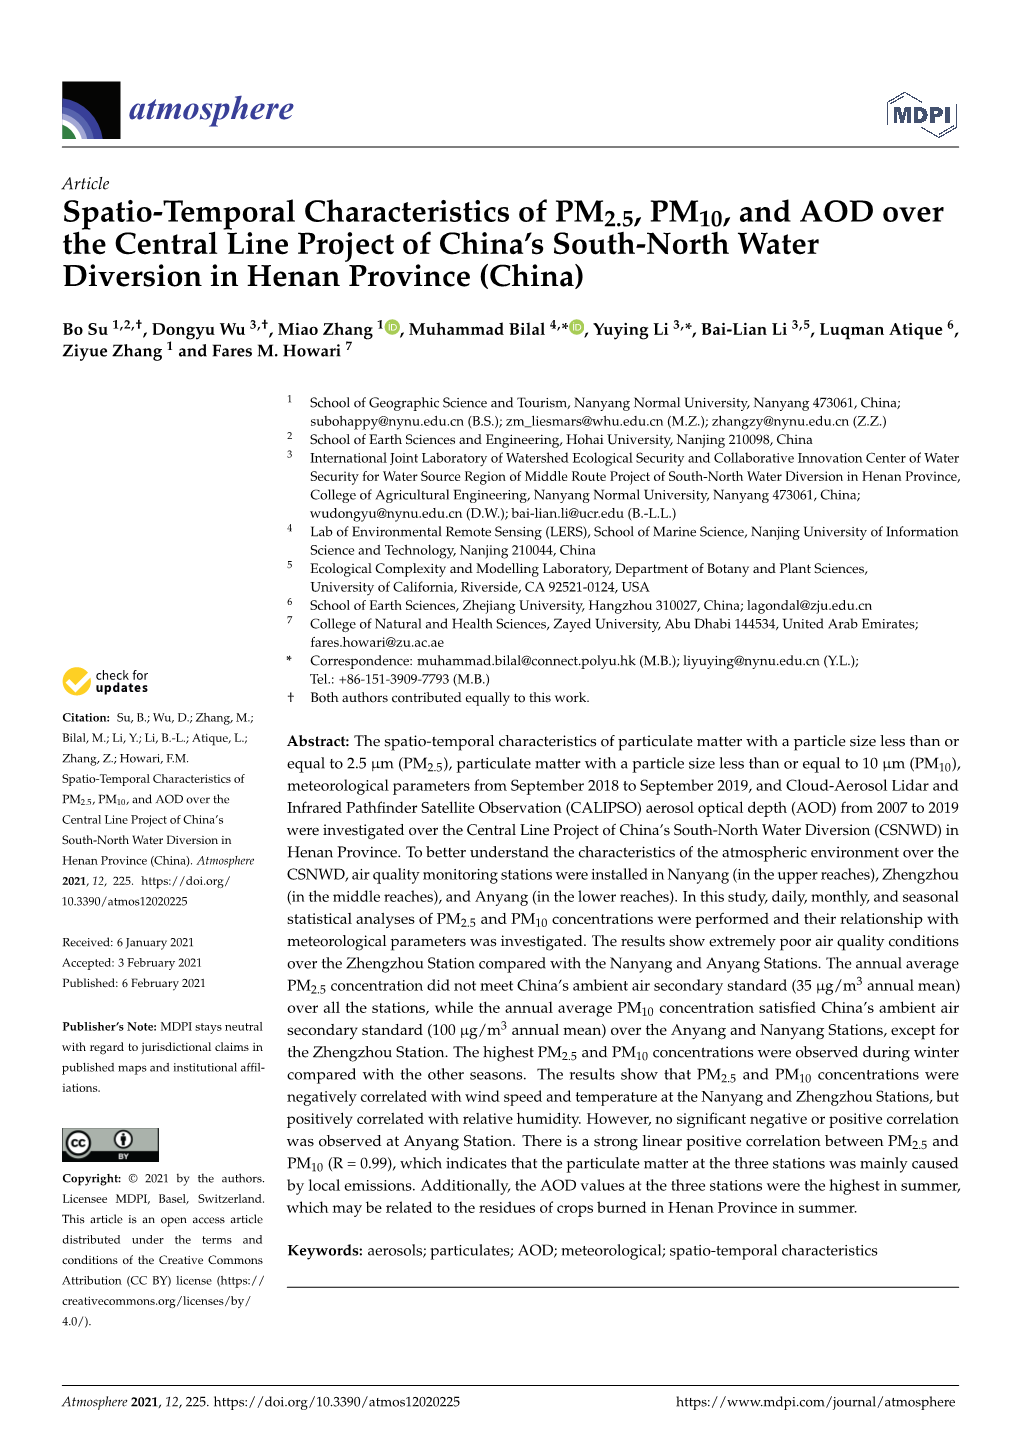 Spatio-Temporal Characteristics of PM2.5, PM10, and AOD Over the Central Line Project of China’S South-North Water Diversion in Henan Province (China)